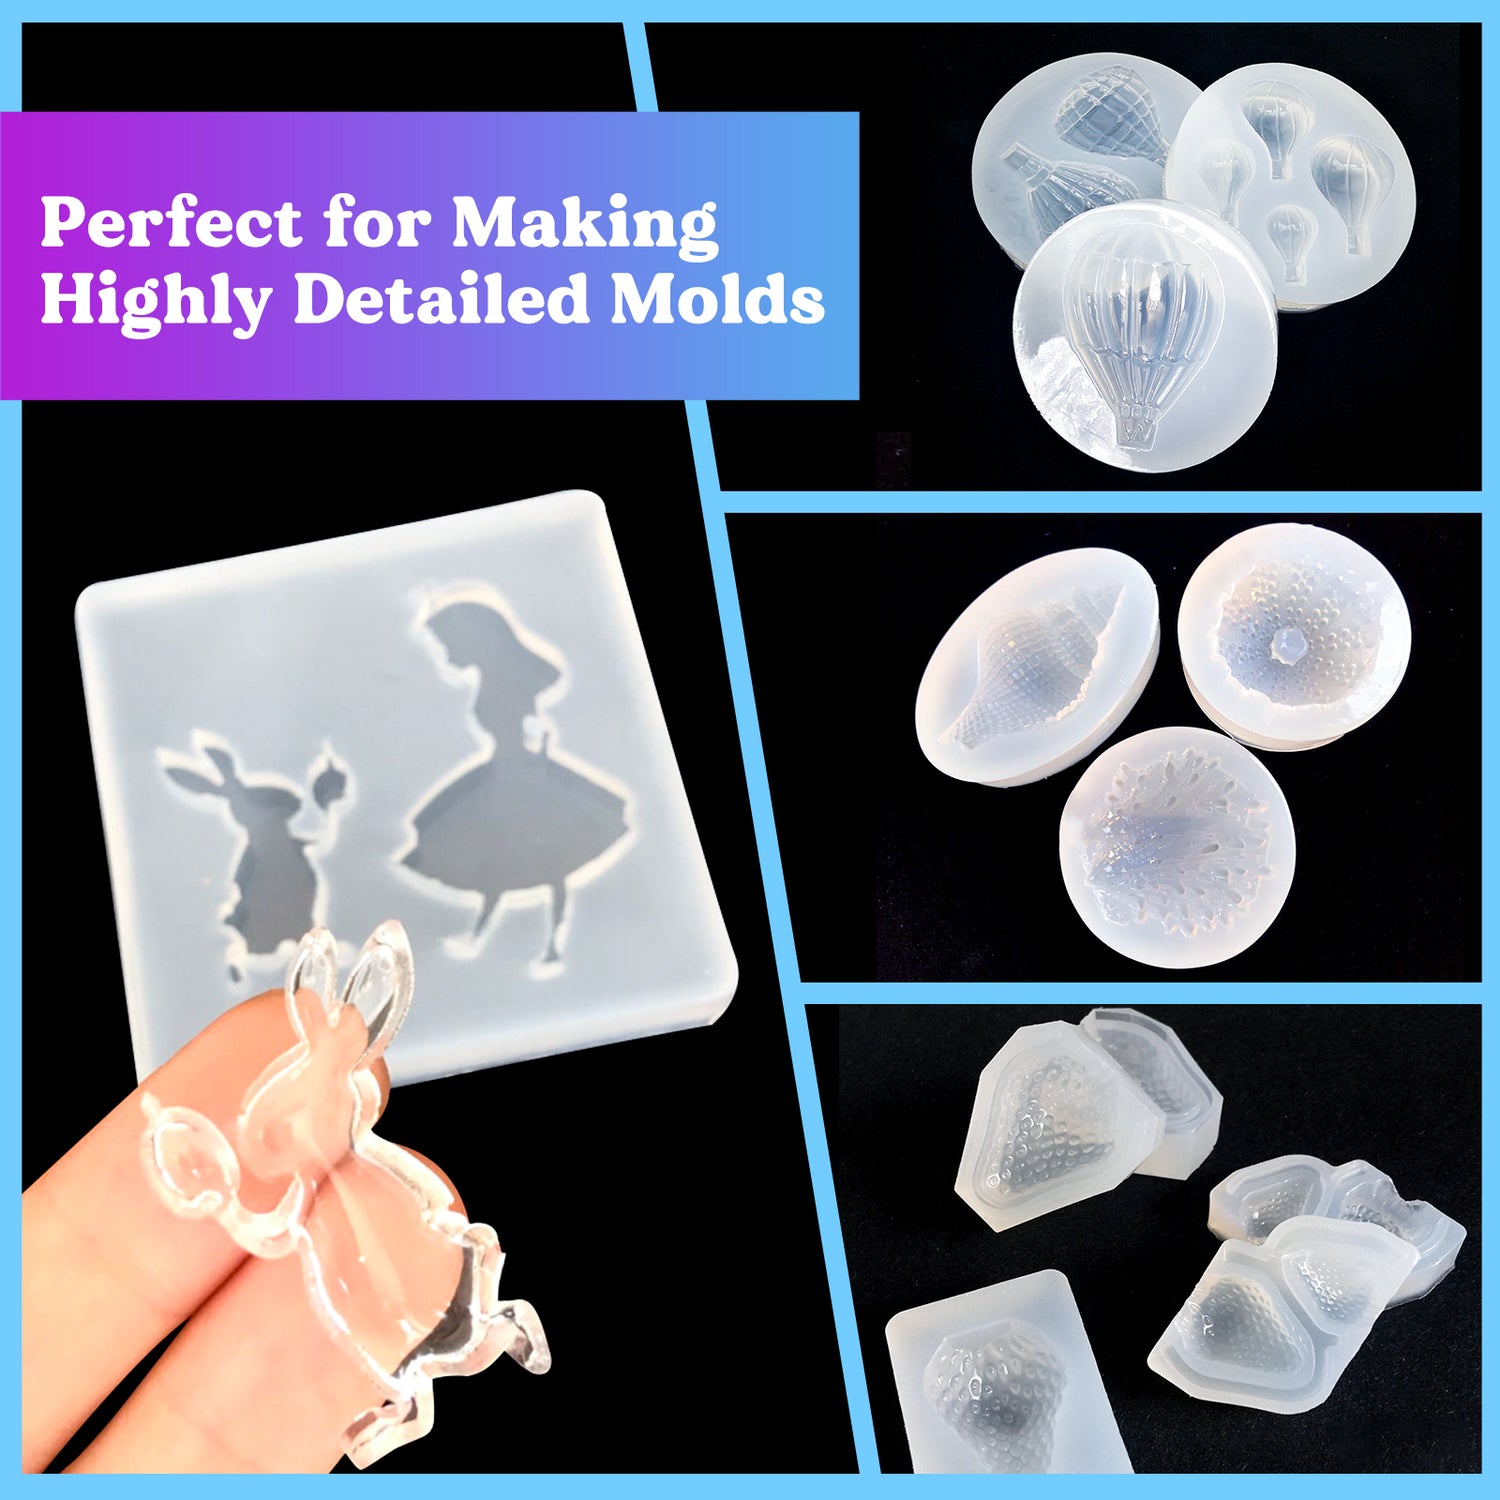 Silicone Mold Making Kit 10A Liquid Silicone Rubber Translucent Mold Maker,  1:1 by Volume, Ideal for Casting Resins Molds & Silicone Molds (2.2lbs)